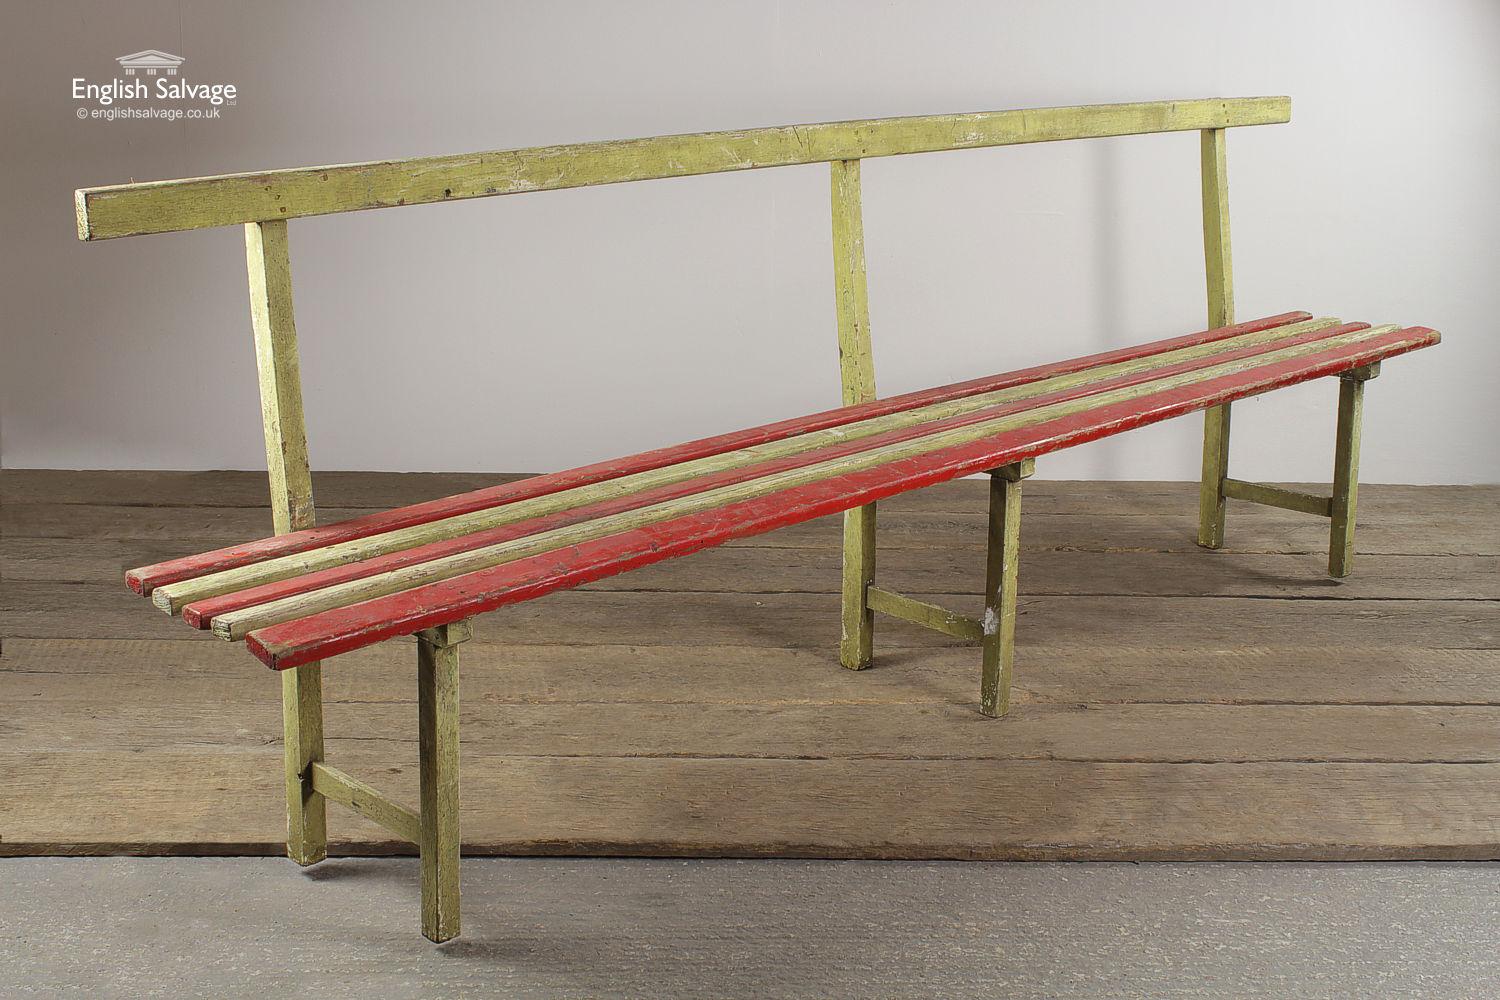 Reclaimed long narrow lightweight plank bench with a red and green paint finish. A colorful piece. This is a indoors bench.

Bench is rather lightweight! Could do with some reinforcement to help stabilise / strengthen it. Some of the paint finish